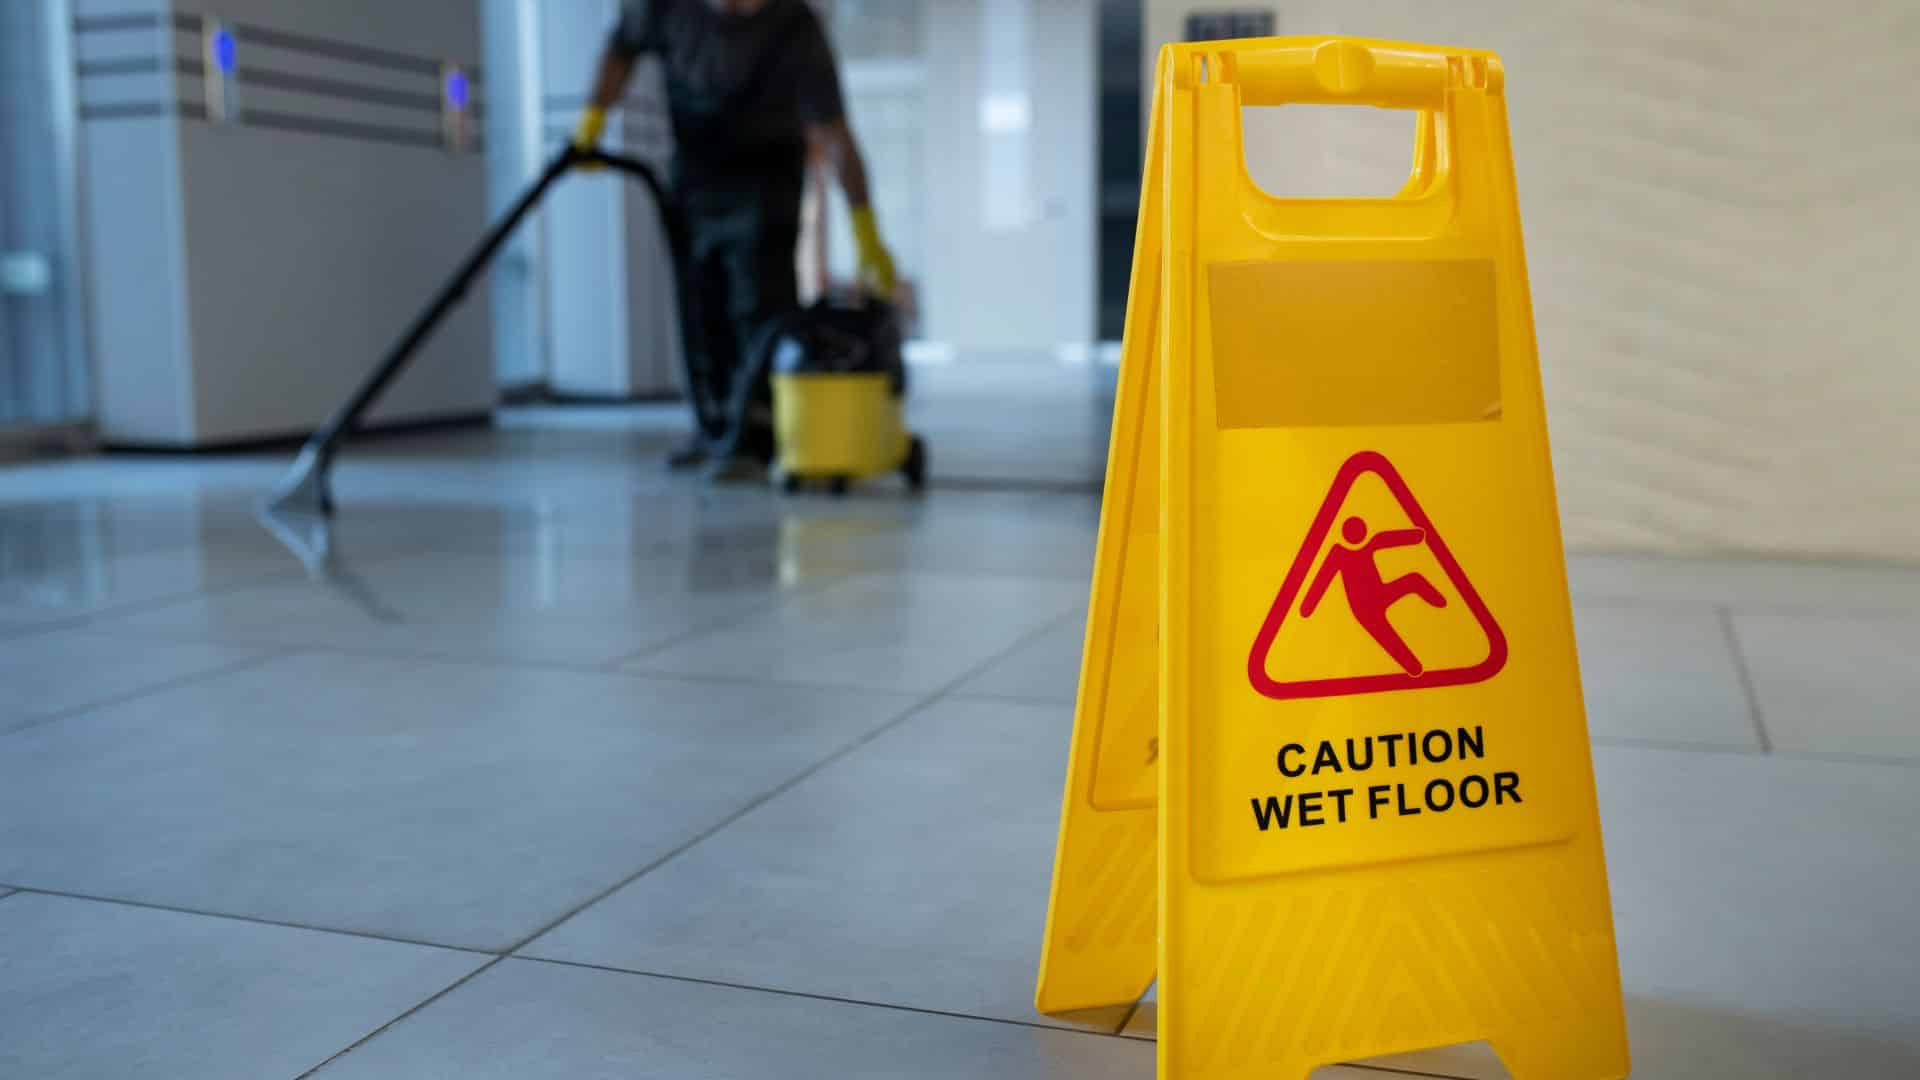 slip and fall cases settlement amounts